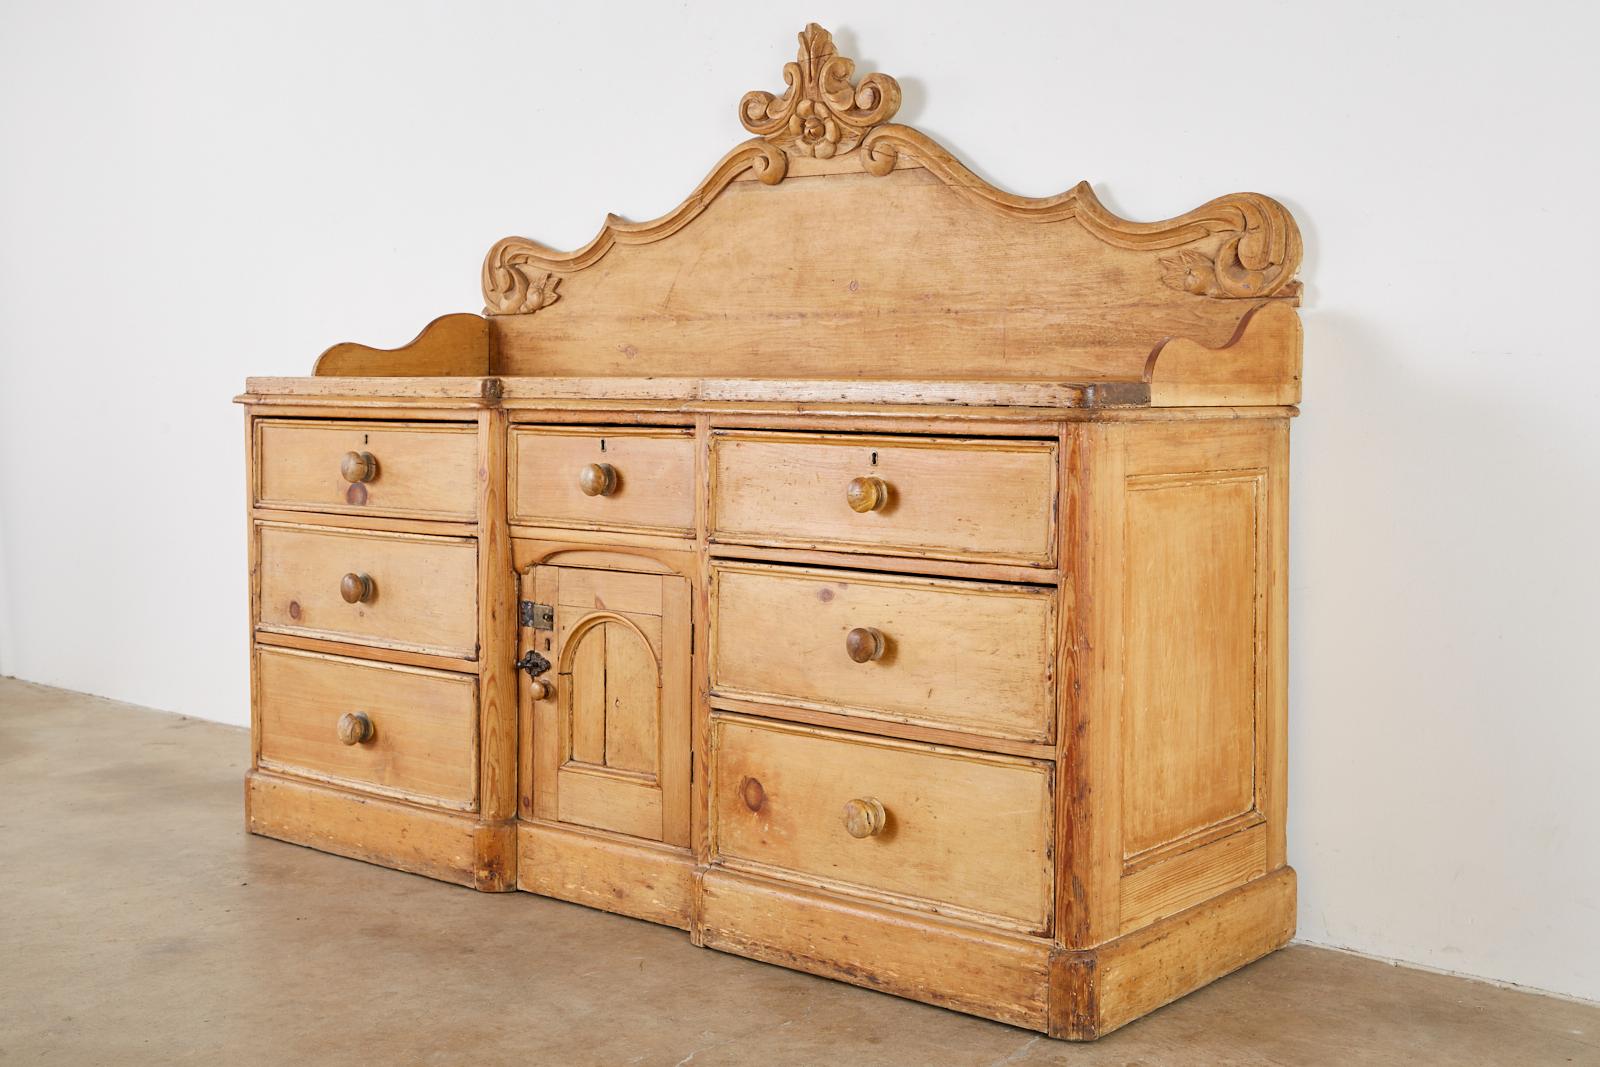 Hand-Crafted 19th Century English Country Pine Sideboard Server or Buffet